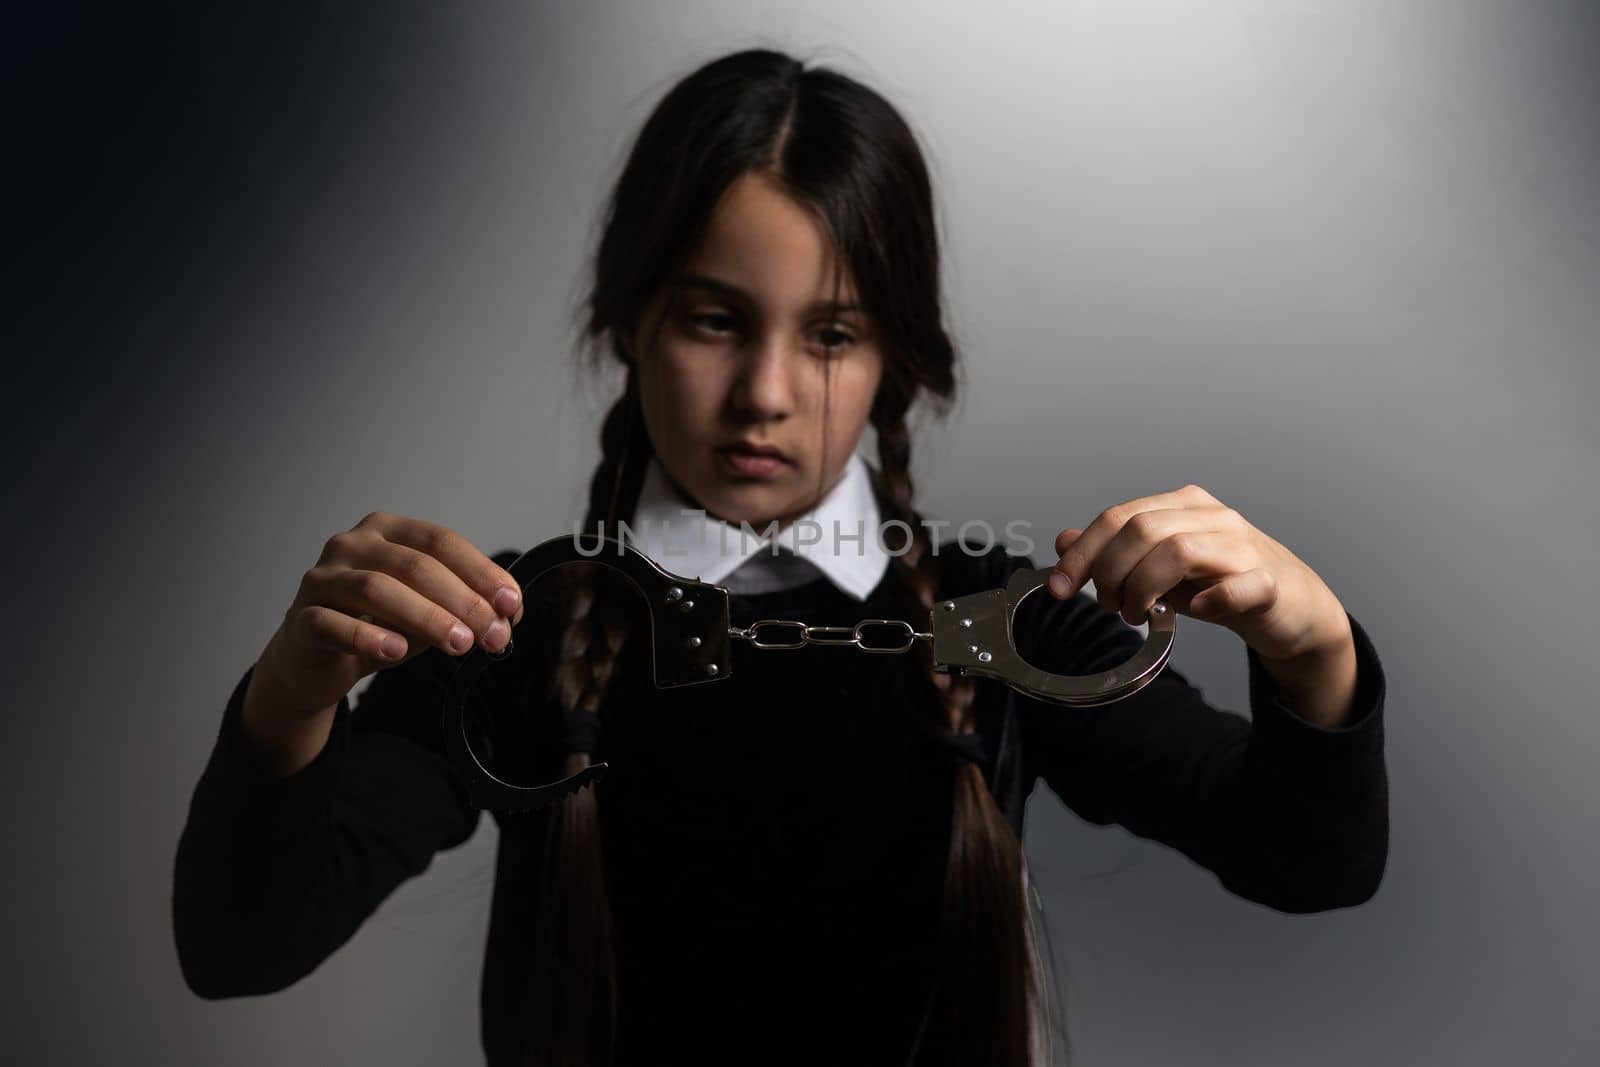 Wednesday . Gothic girl with handcuff.